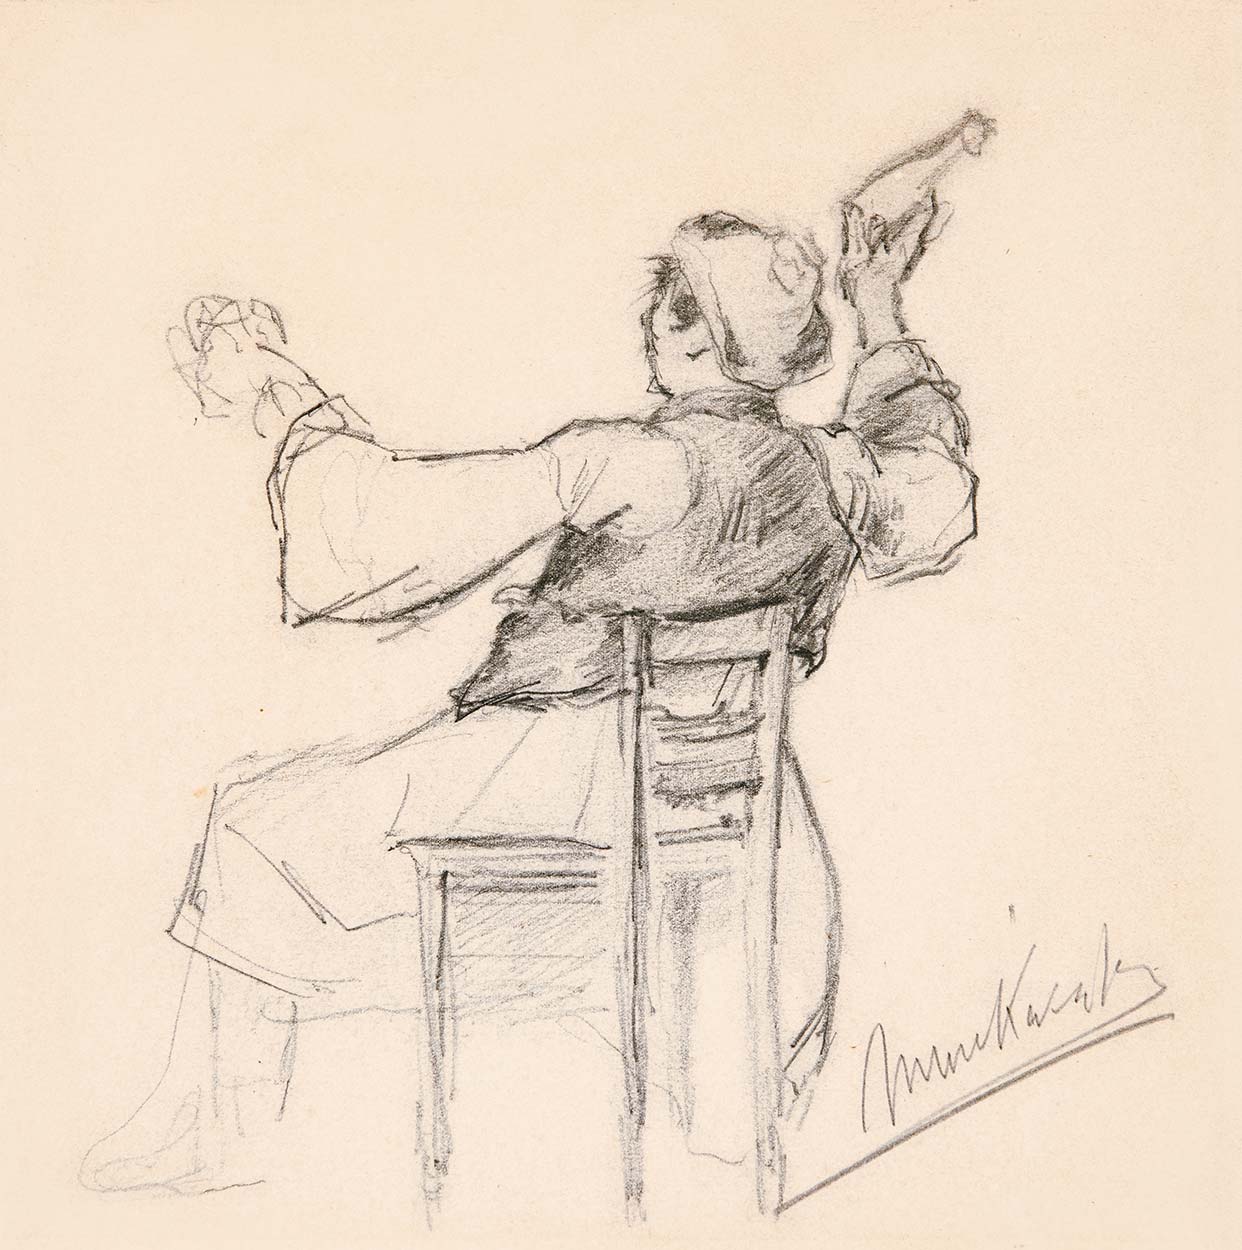 Munkácsy Mihály (1844-1900) Study for The Recruitment Painting